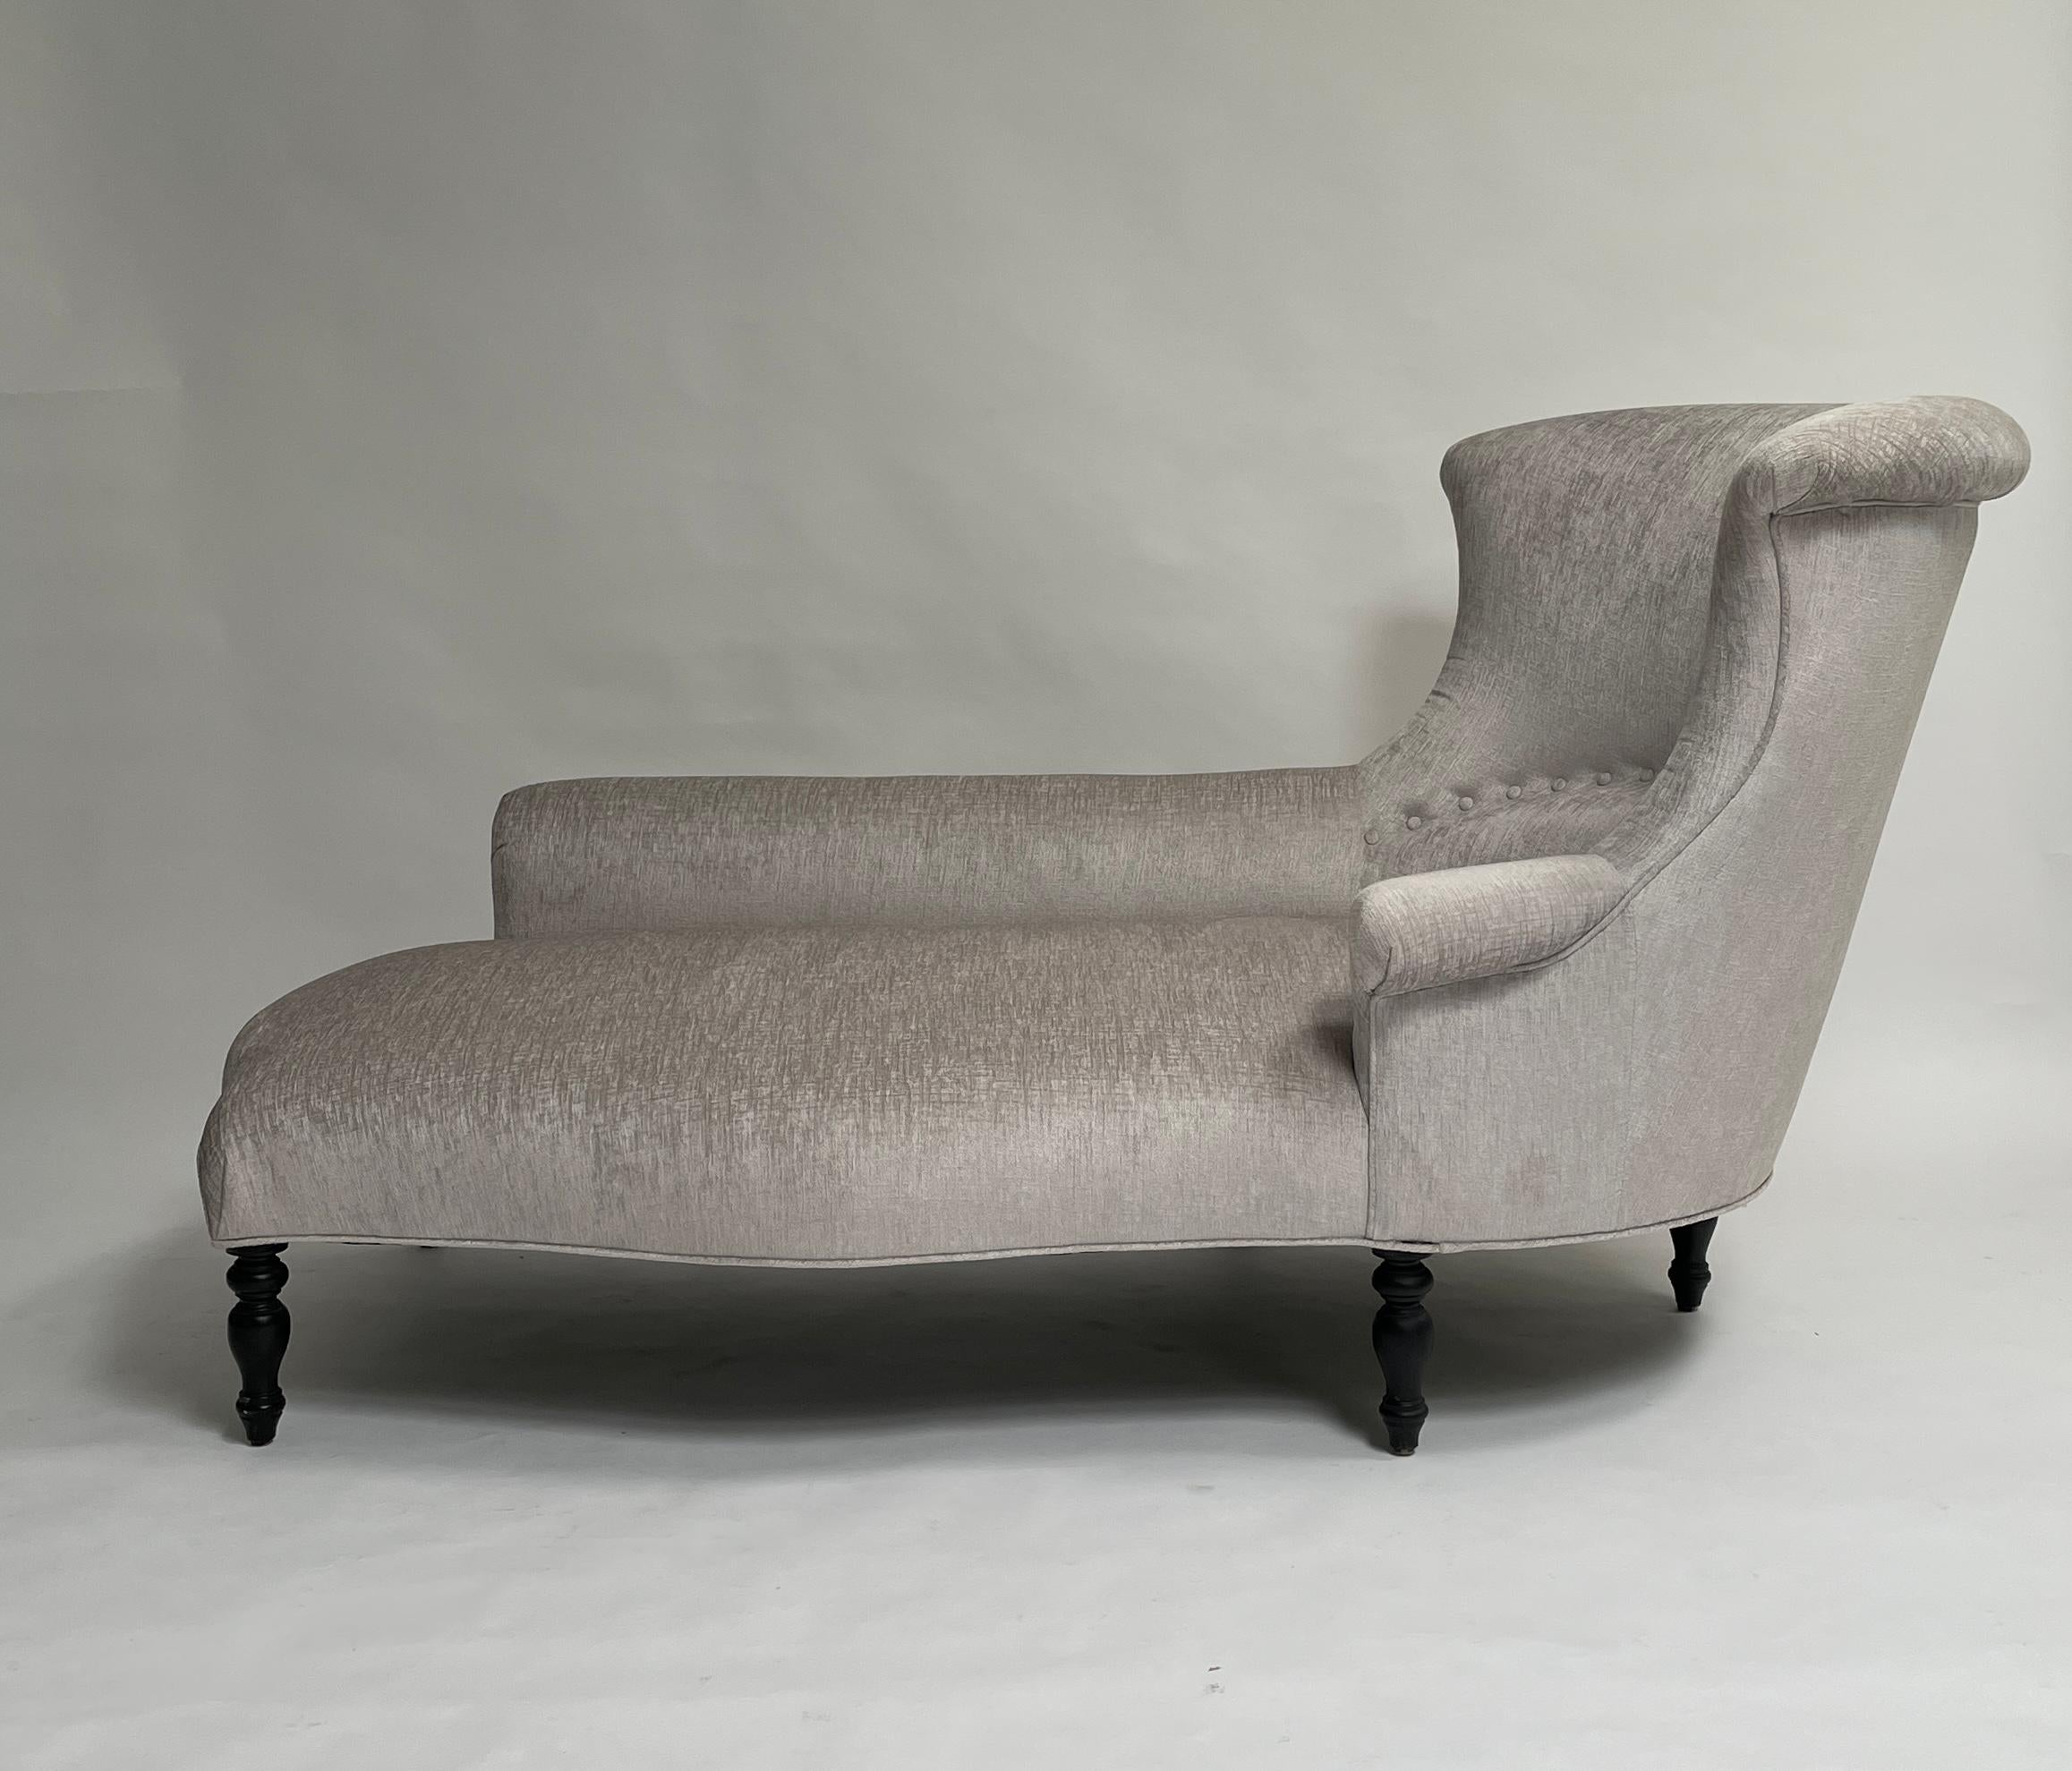 Garronne Chaise Lounge by Bourgeois Boheme Atelier, Silver In New Condition For Sale In Los Angeles, CA